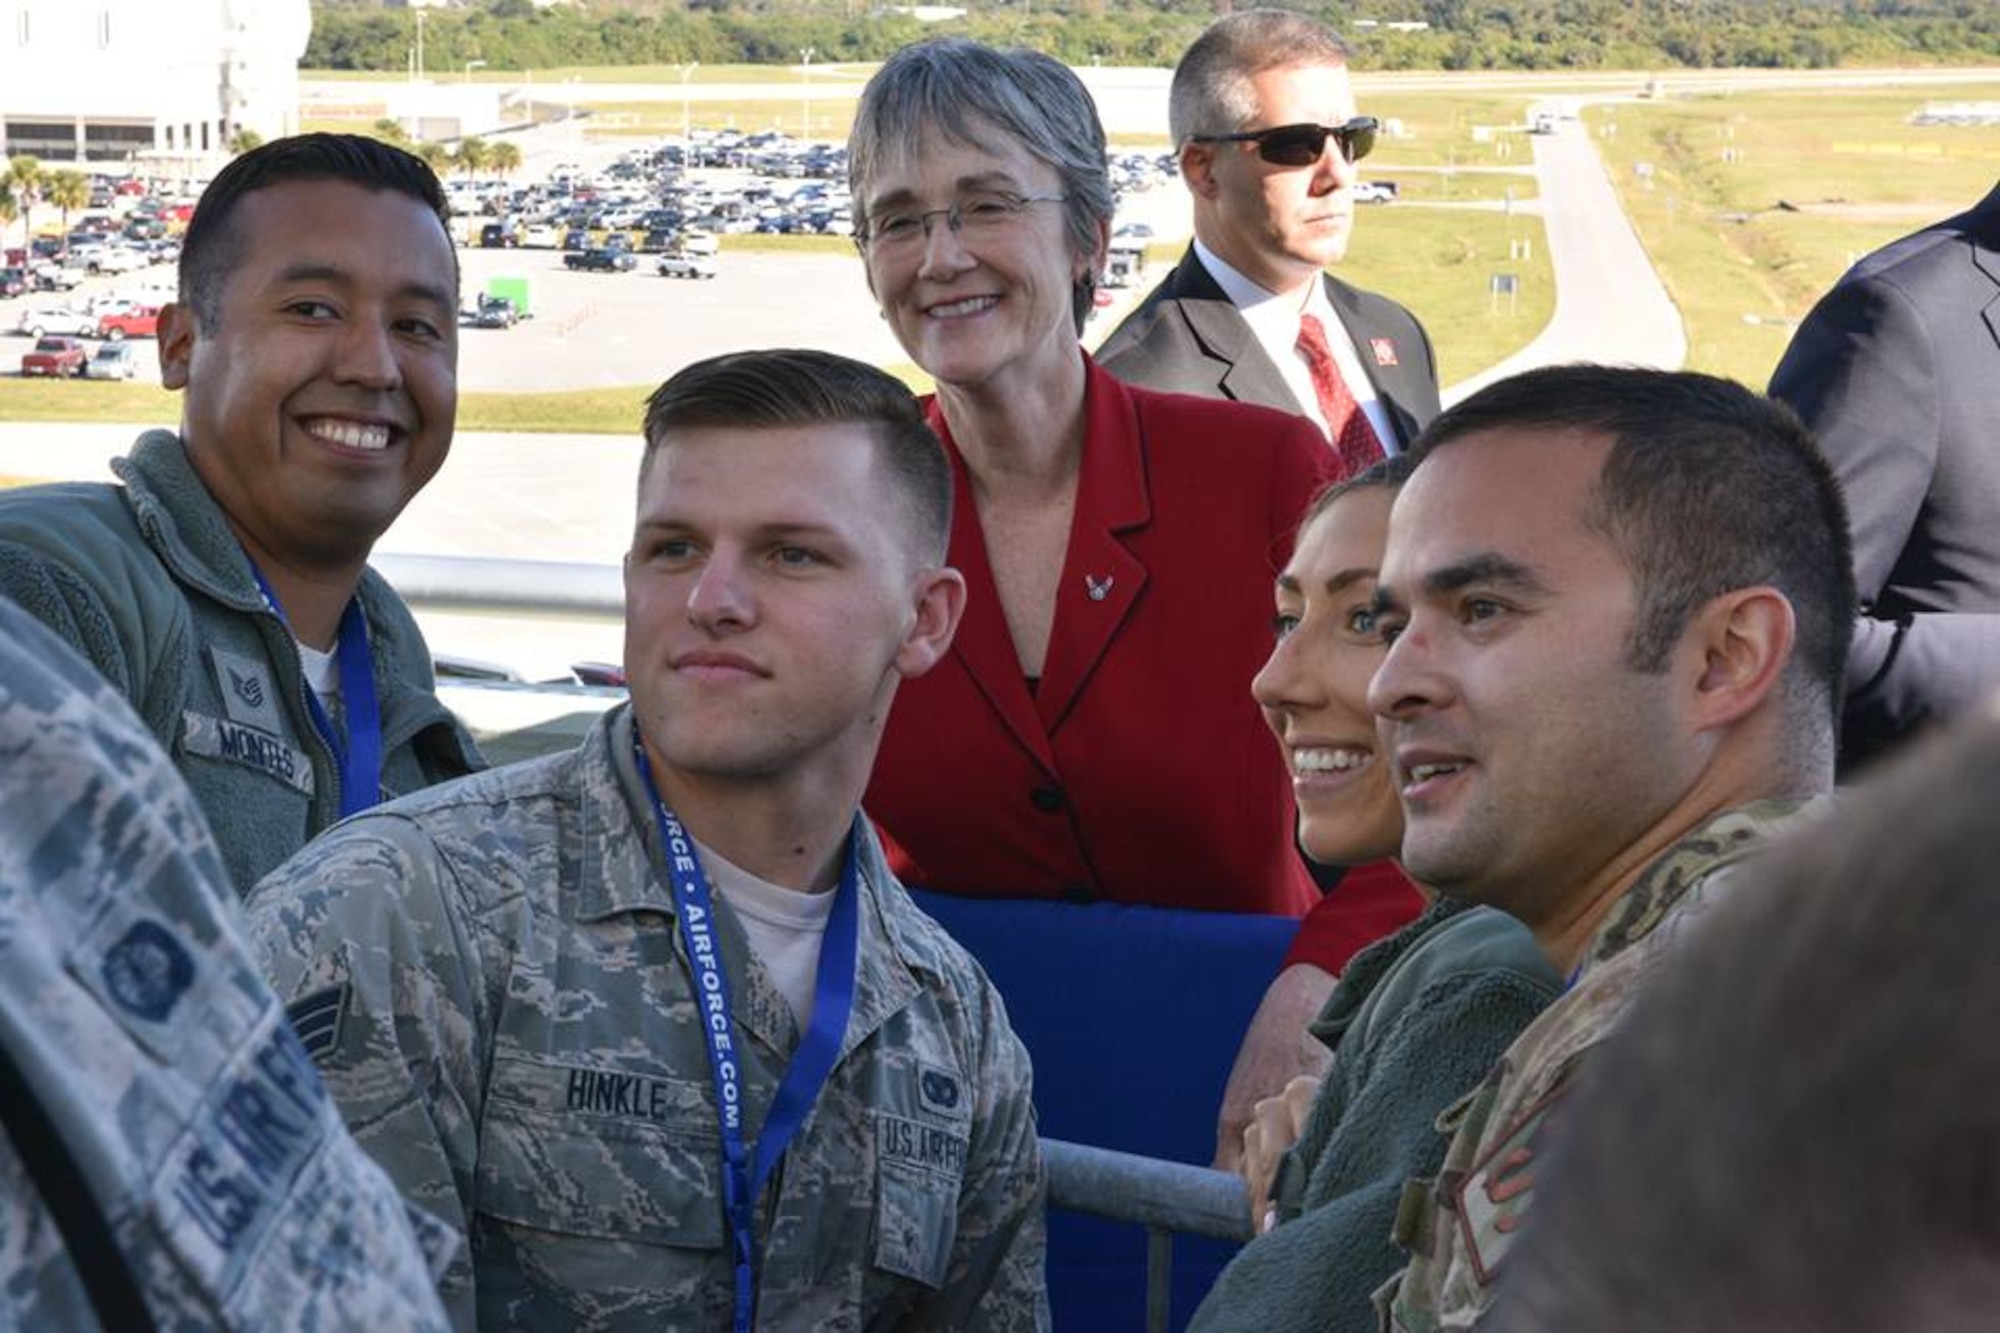 Secretary of the Air Force Heather Wilson takes a photo with 45th Space Wing Airmen at Cape Canaveral Air Force Station, Fla., Dec. 18, 2018. Wilson toured multiple facilities of Cape Canaveral and met with several 45th Space Wing Airmen. (U.S. Air Force photo by Airman 1st Class Dalton Williams)